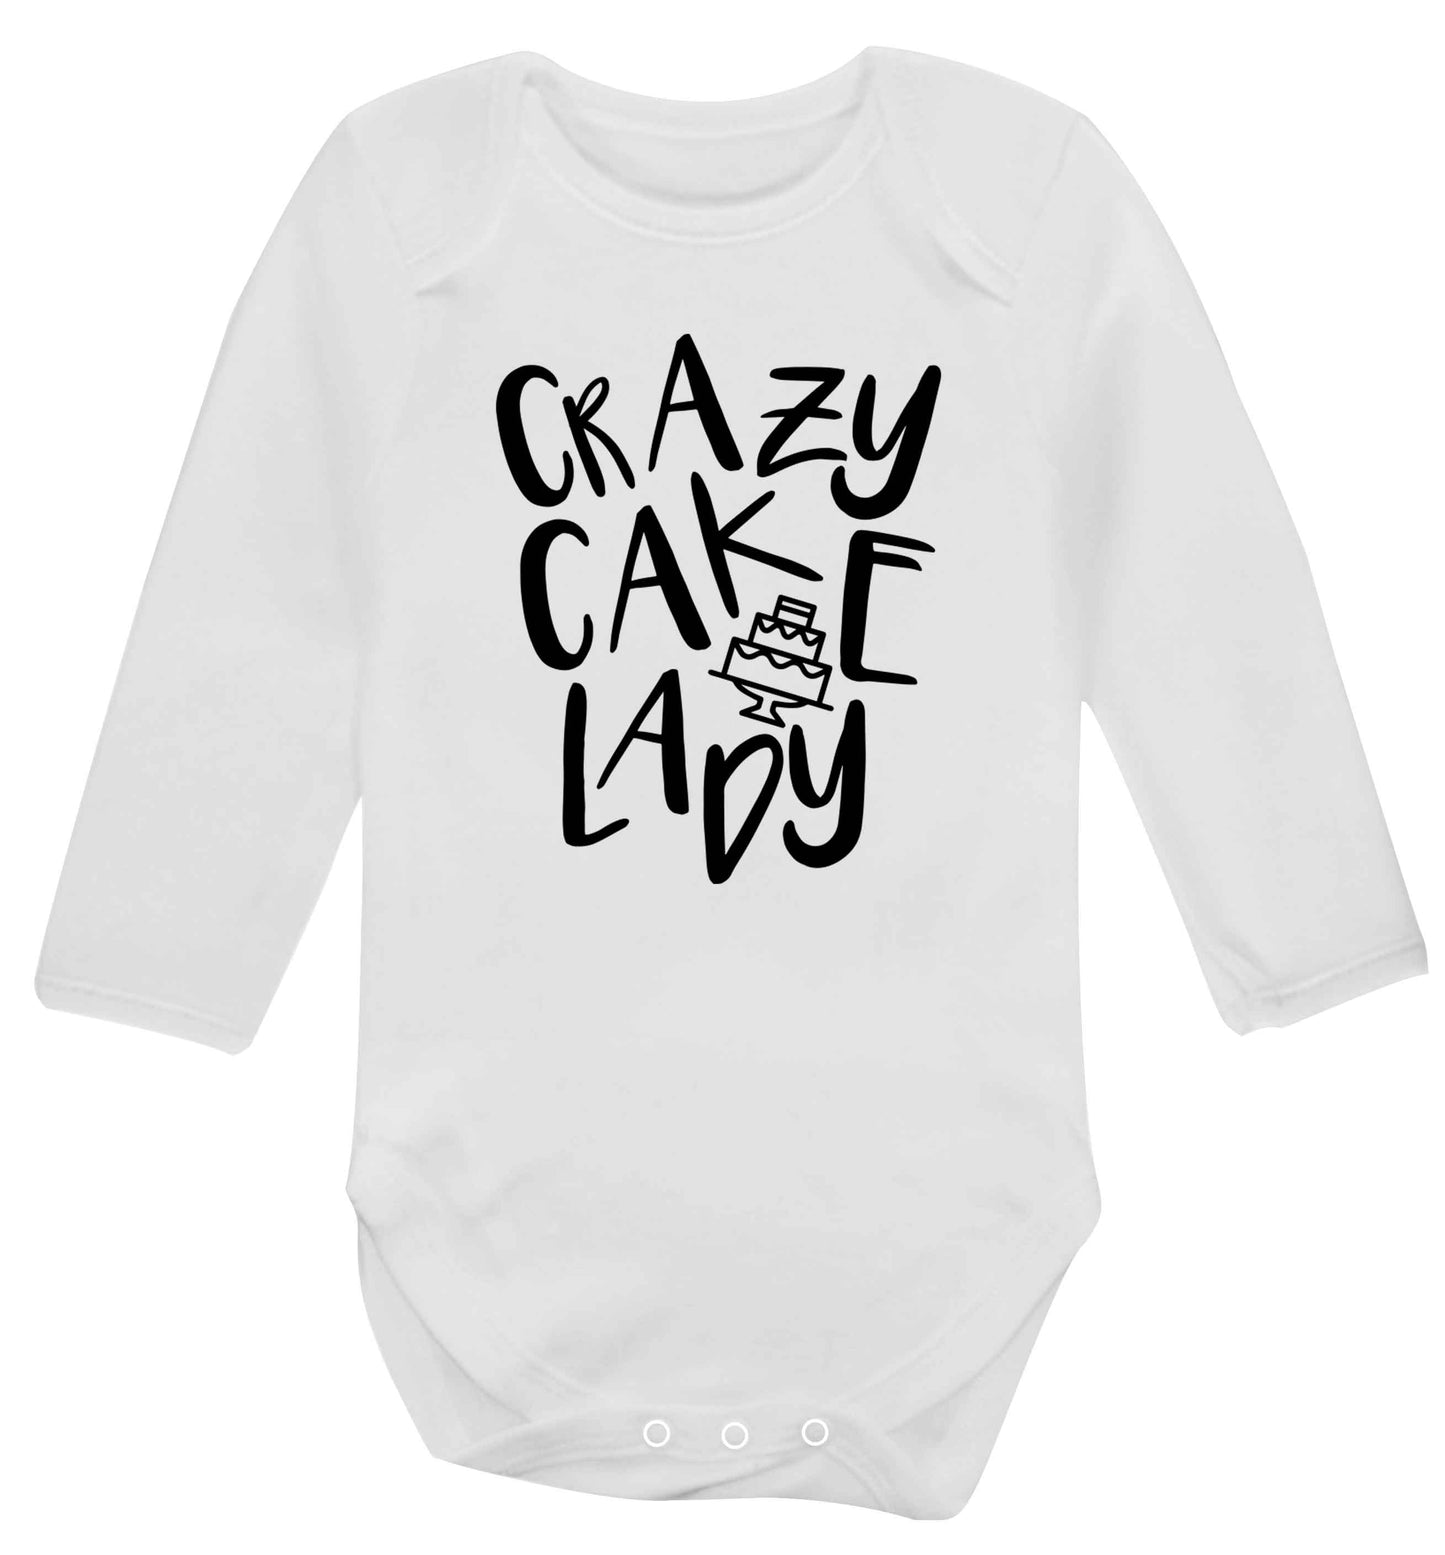 Crazy cake lady Baby Vest long sleeved white 6-12 months